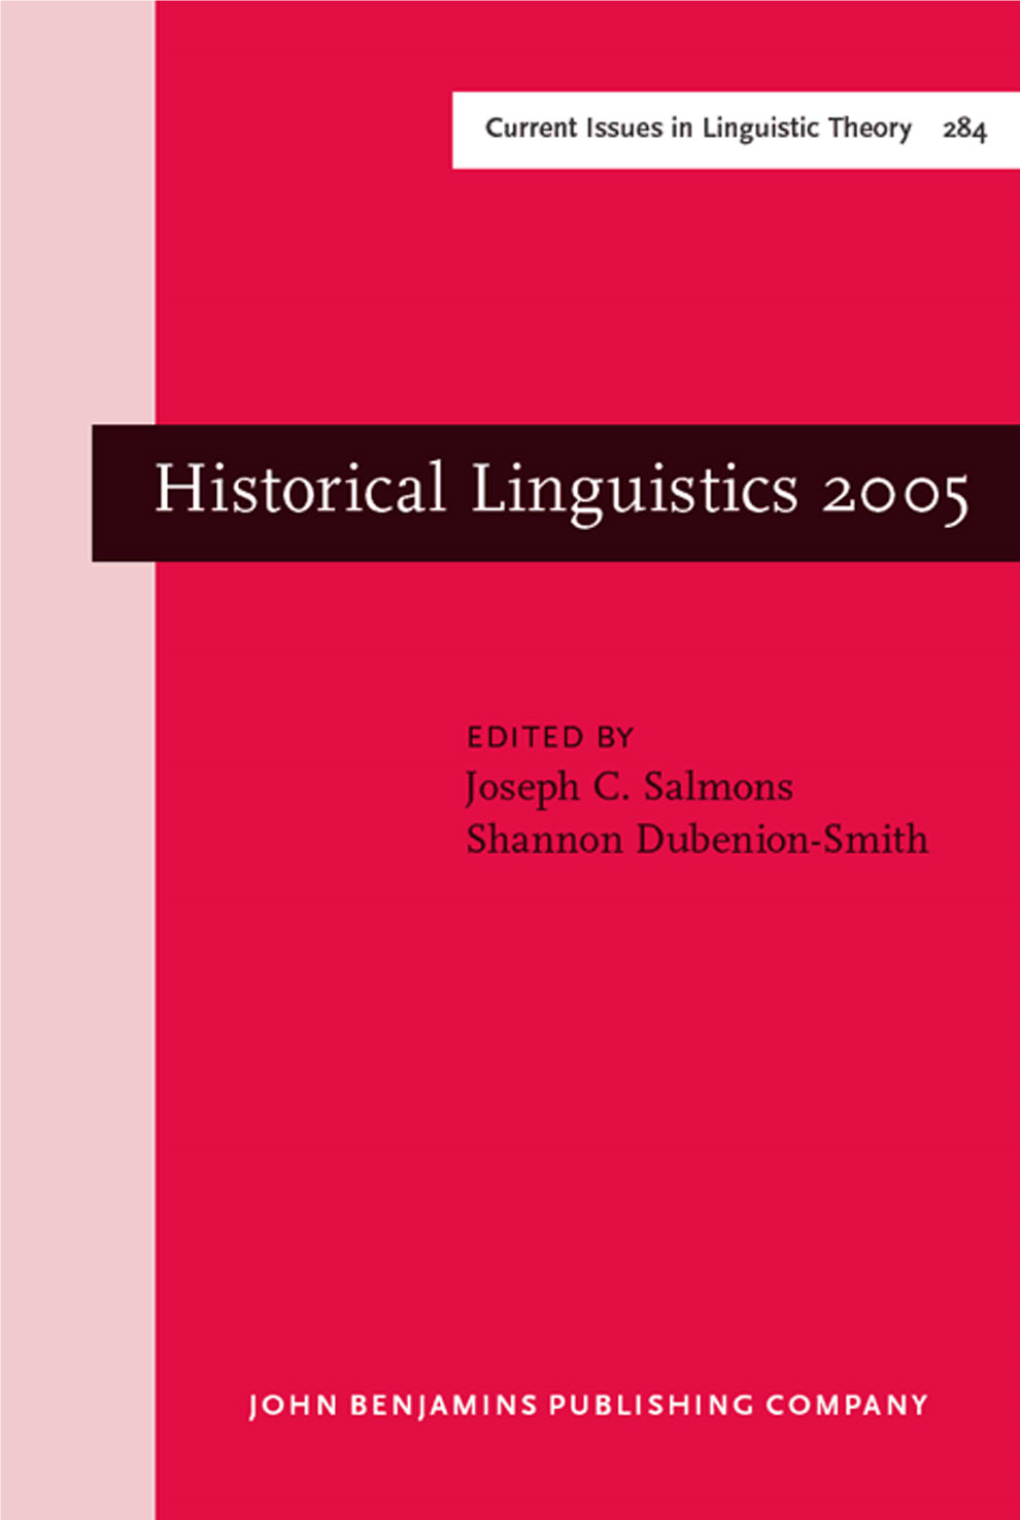 Facts, Theory and Dogmas in Historical Linguistics